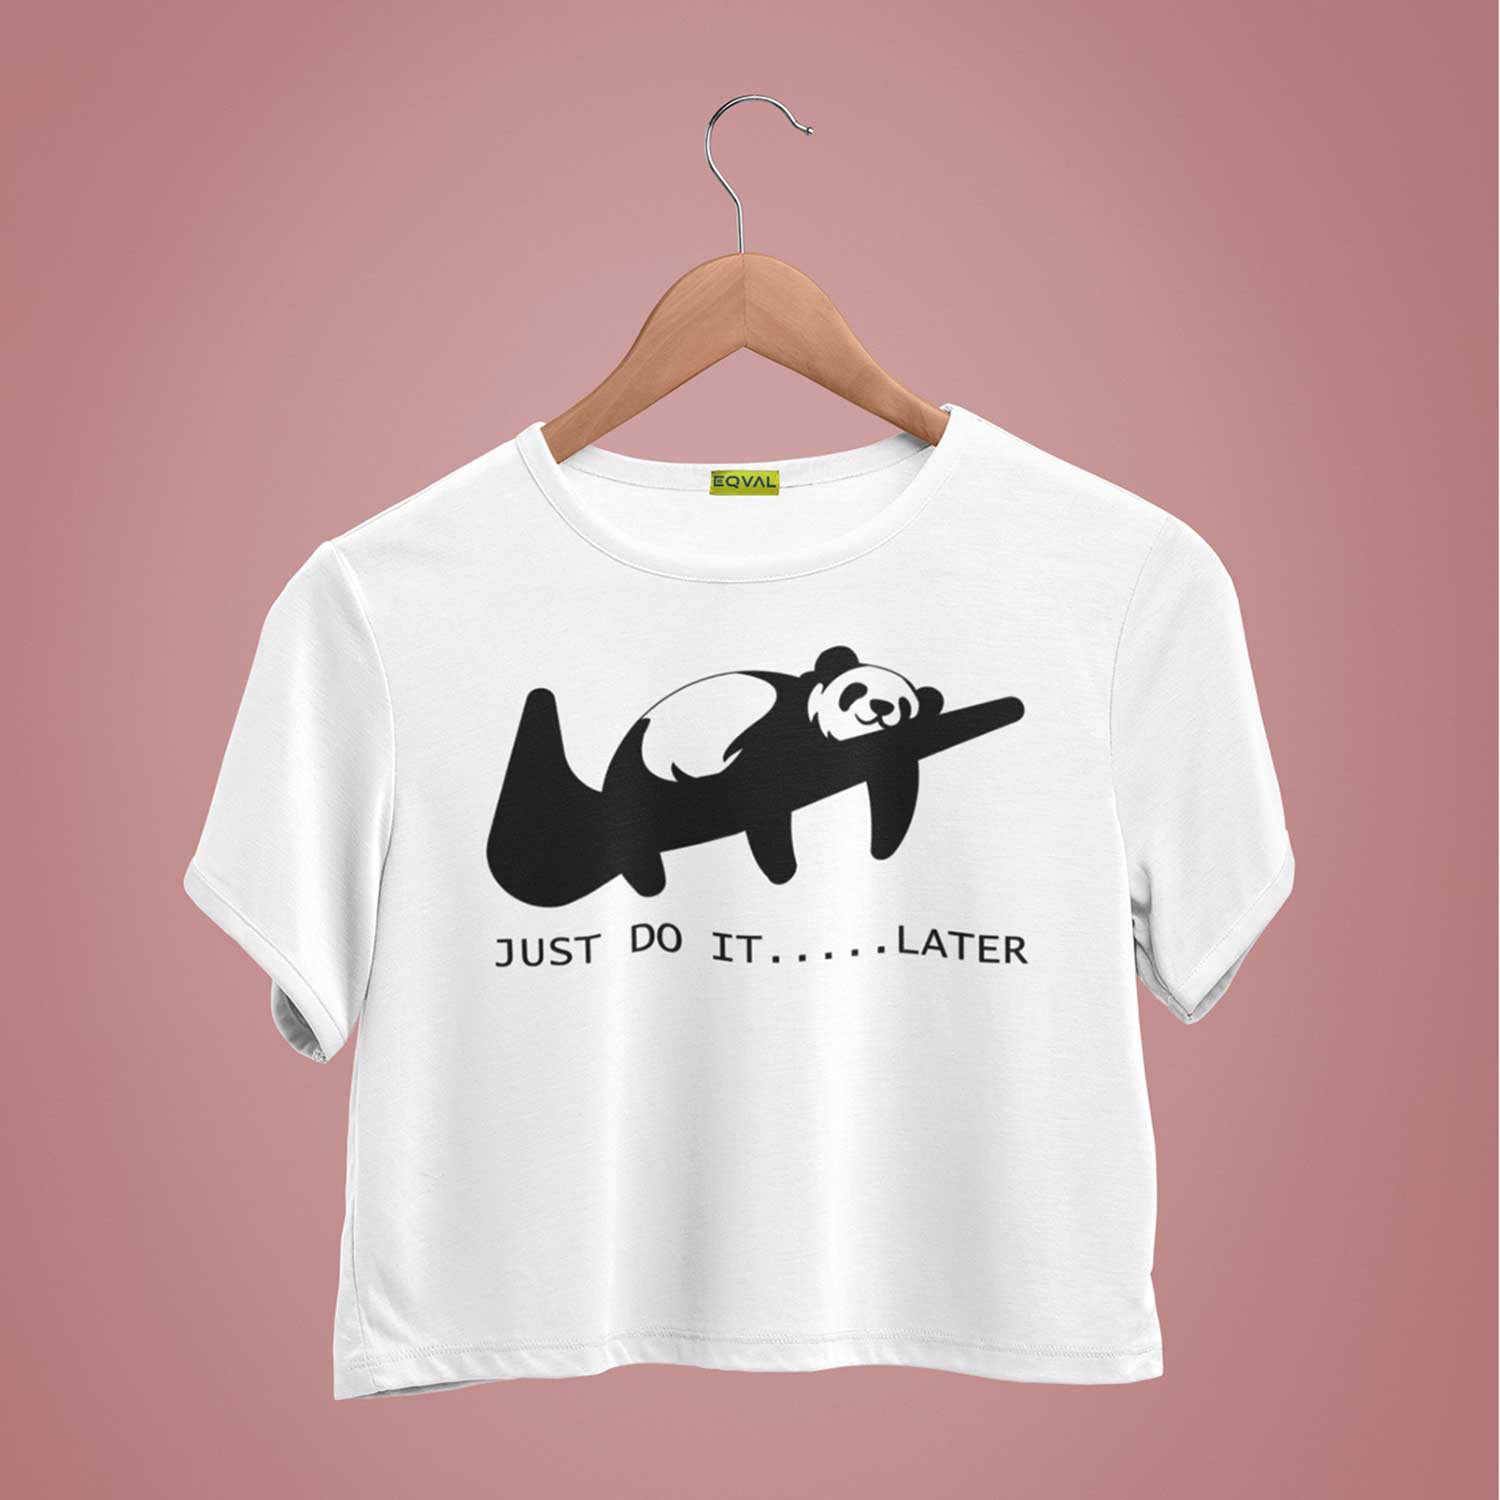 Just Do It Later Printed Crop Top Tshirt